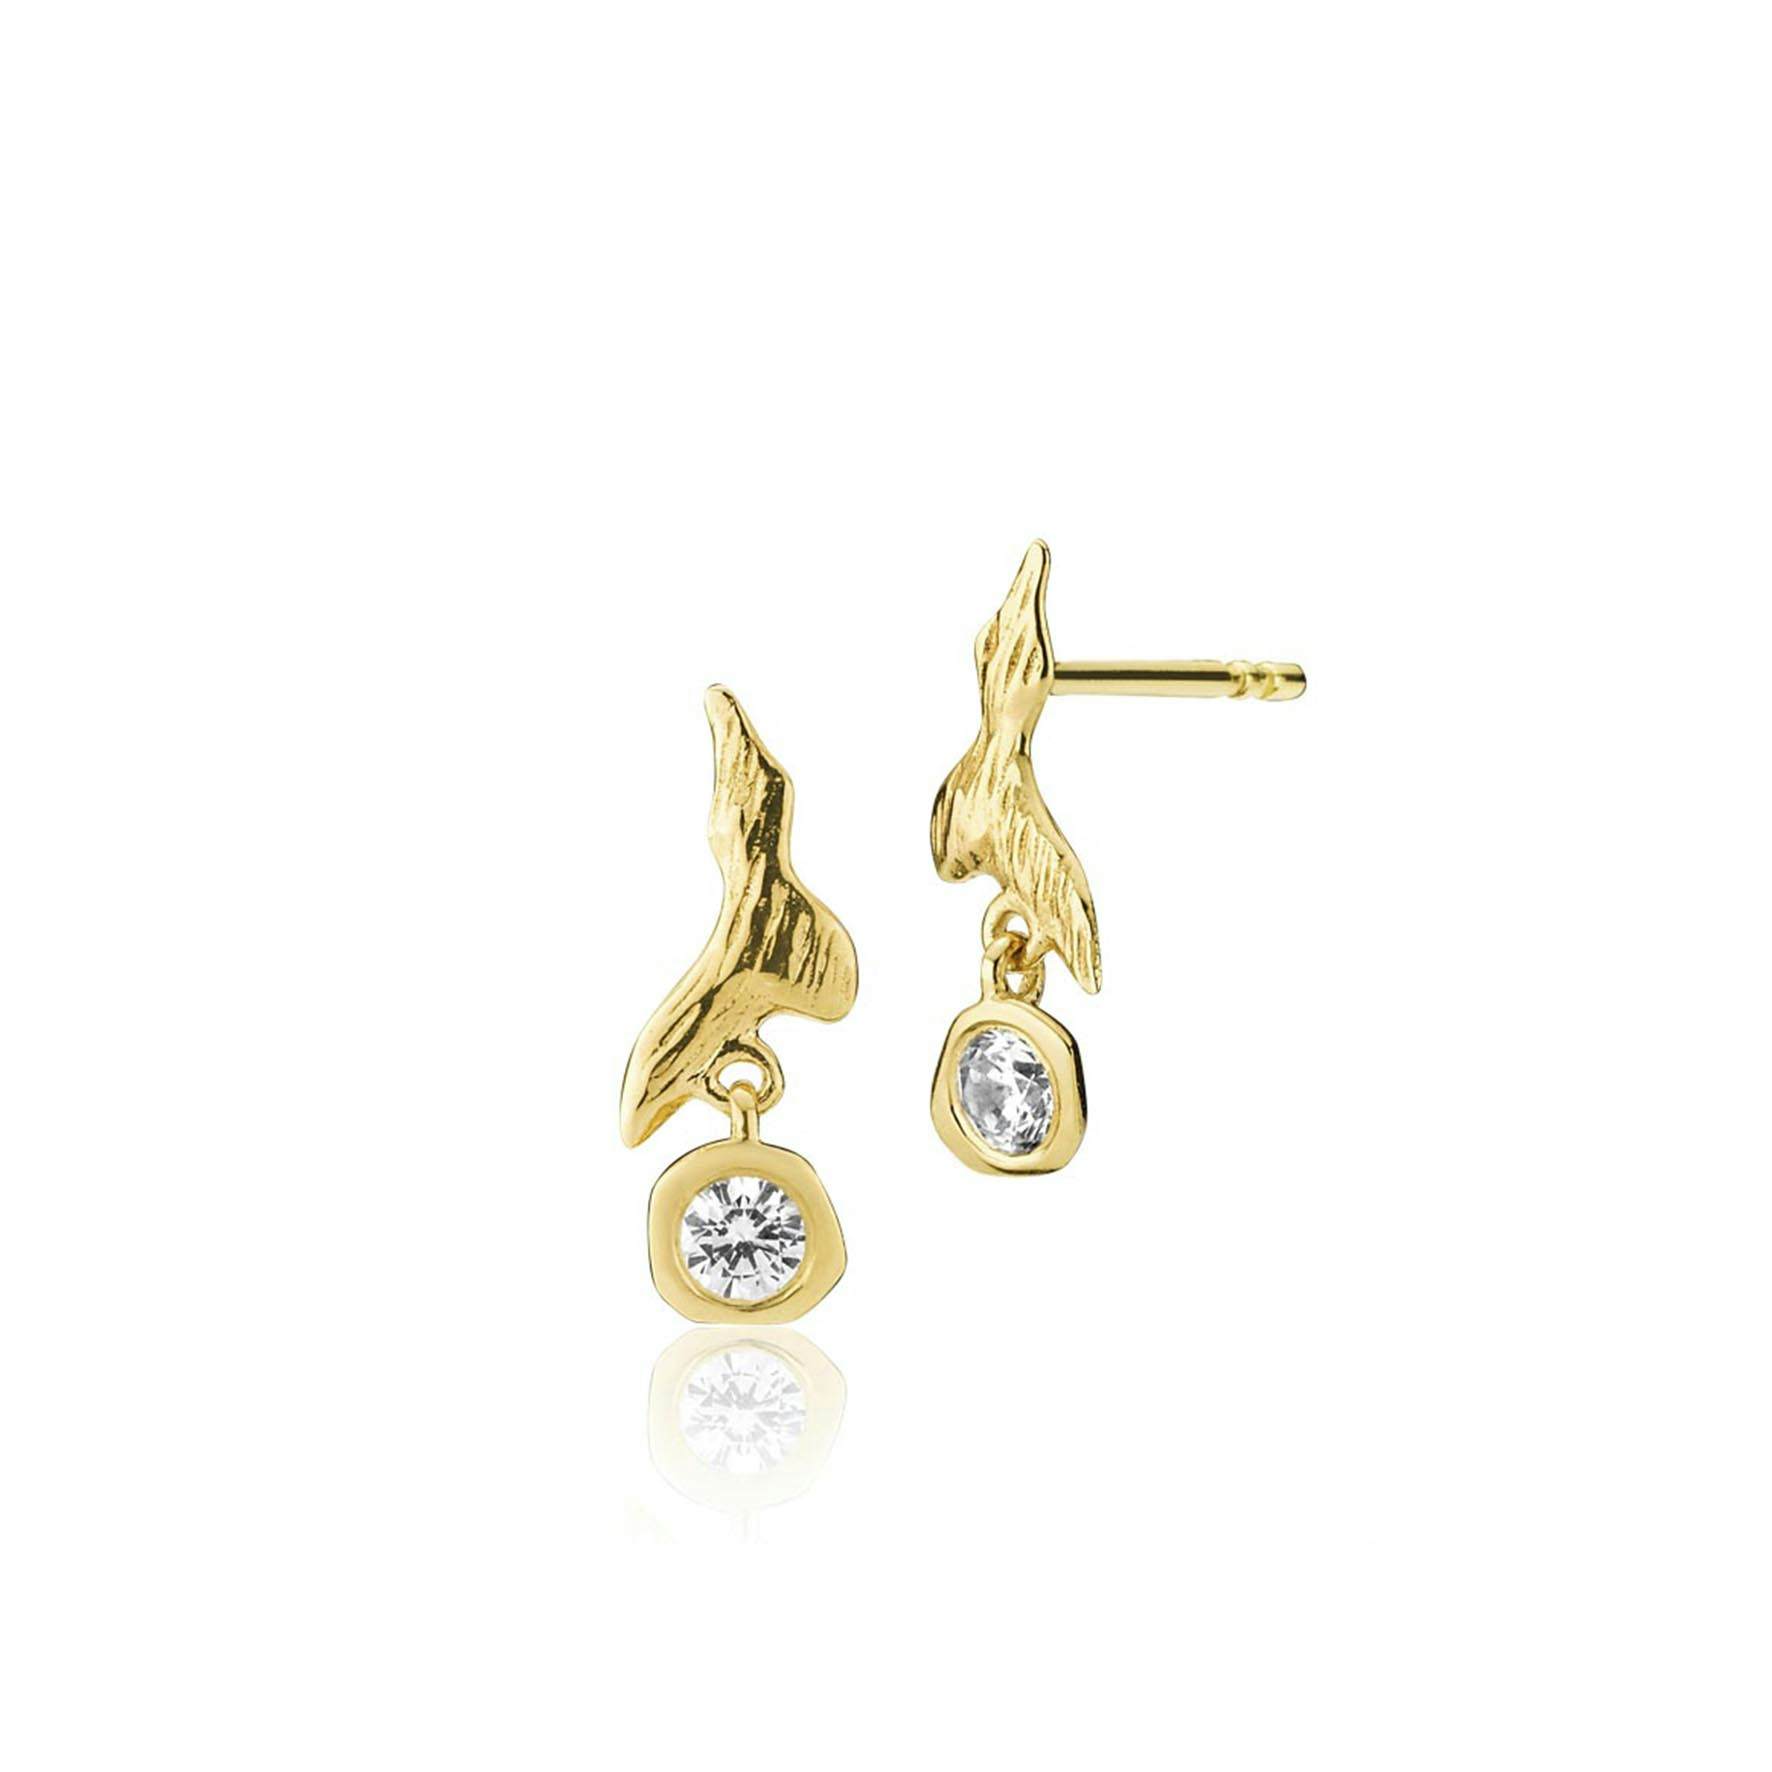 Fairy Earrings With Stone from Izabel Camille in Goldplated-Silver Sterling 925|